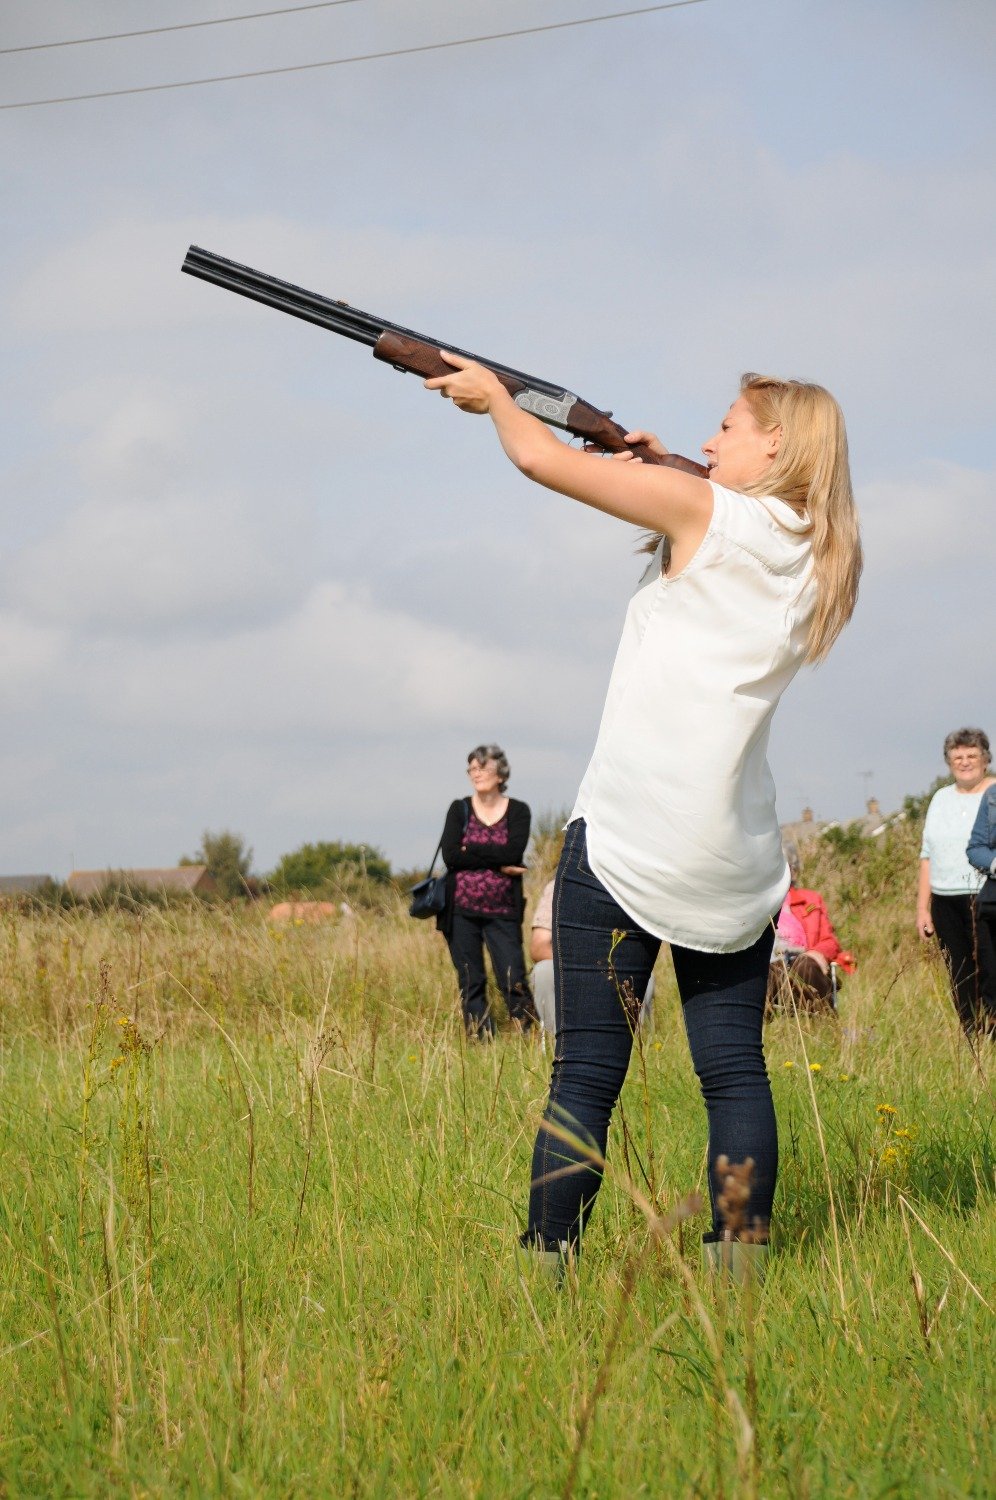 Free Clay Pigeon Games